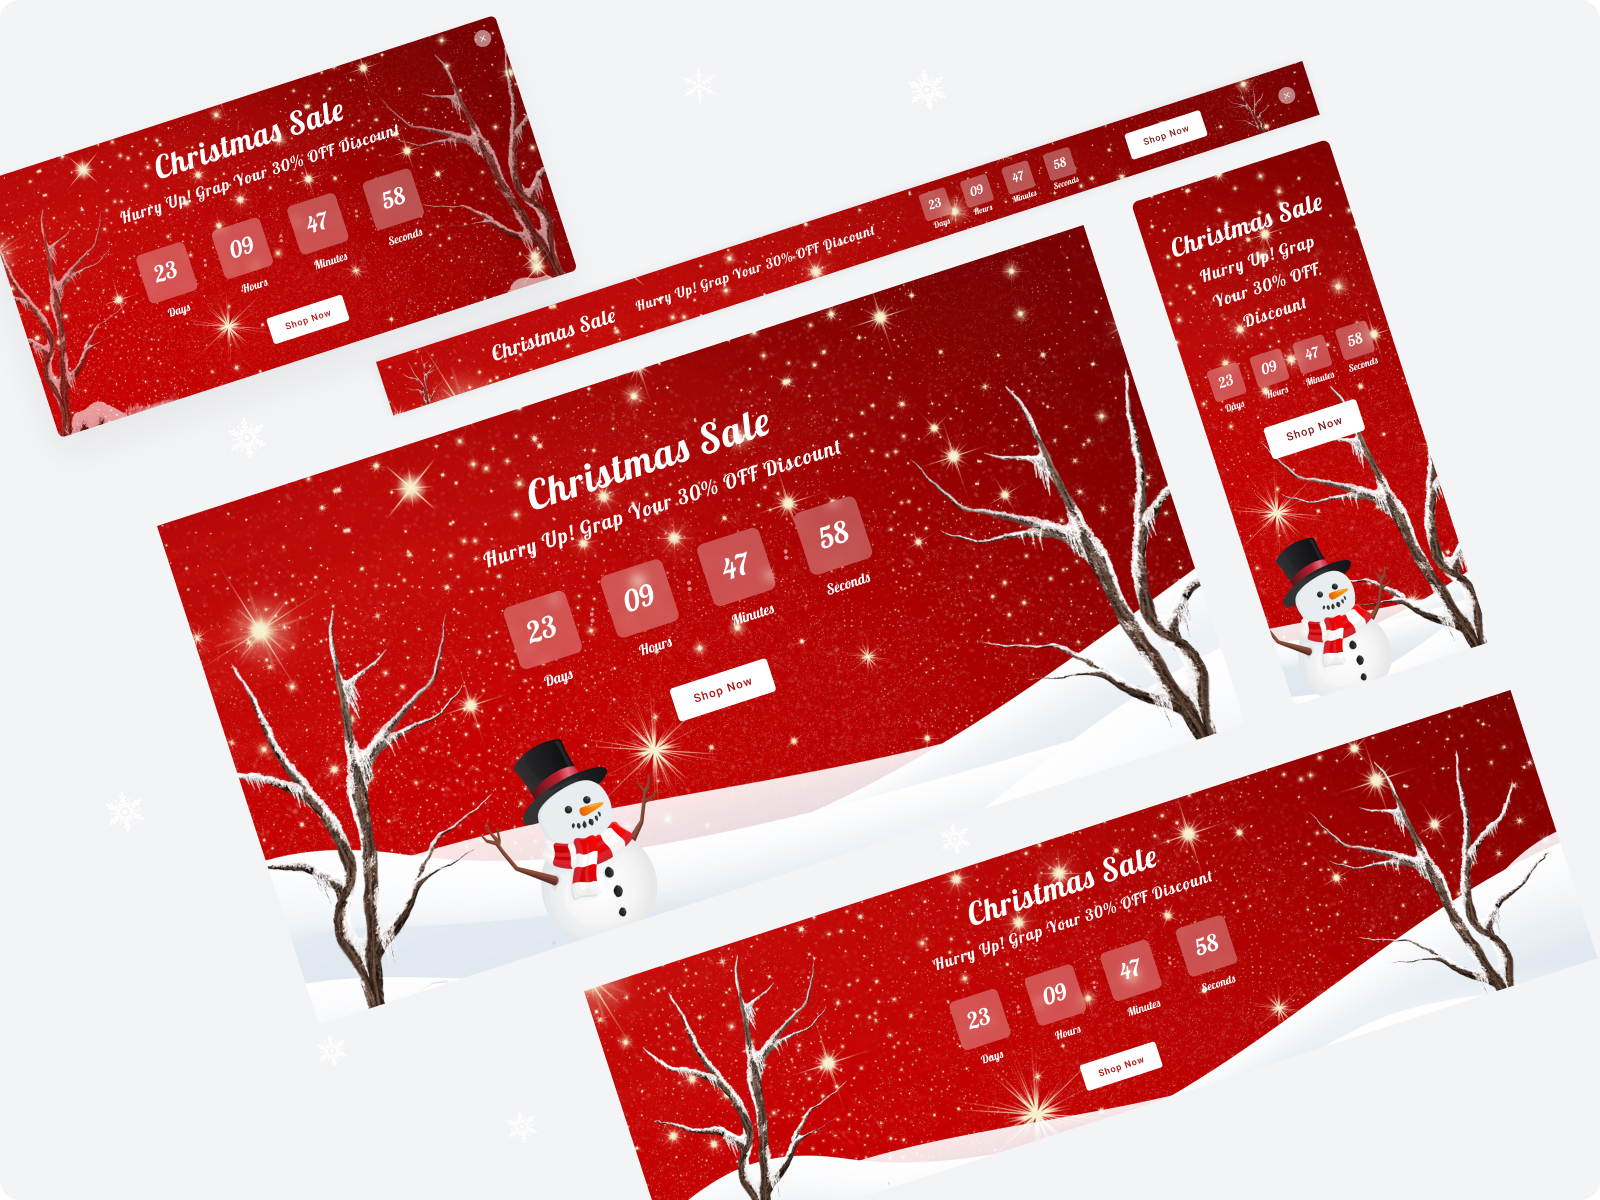 Christmas widgets with a countdown timer by Fouita on Dribbble